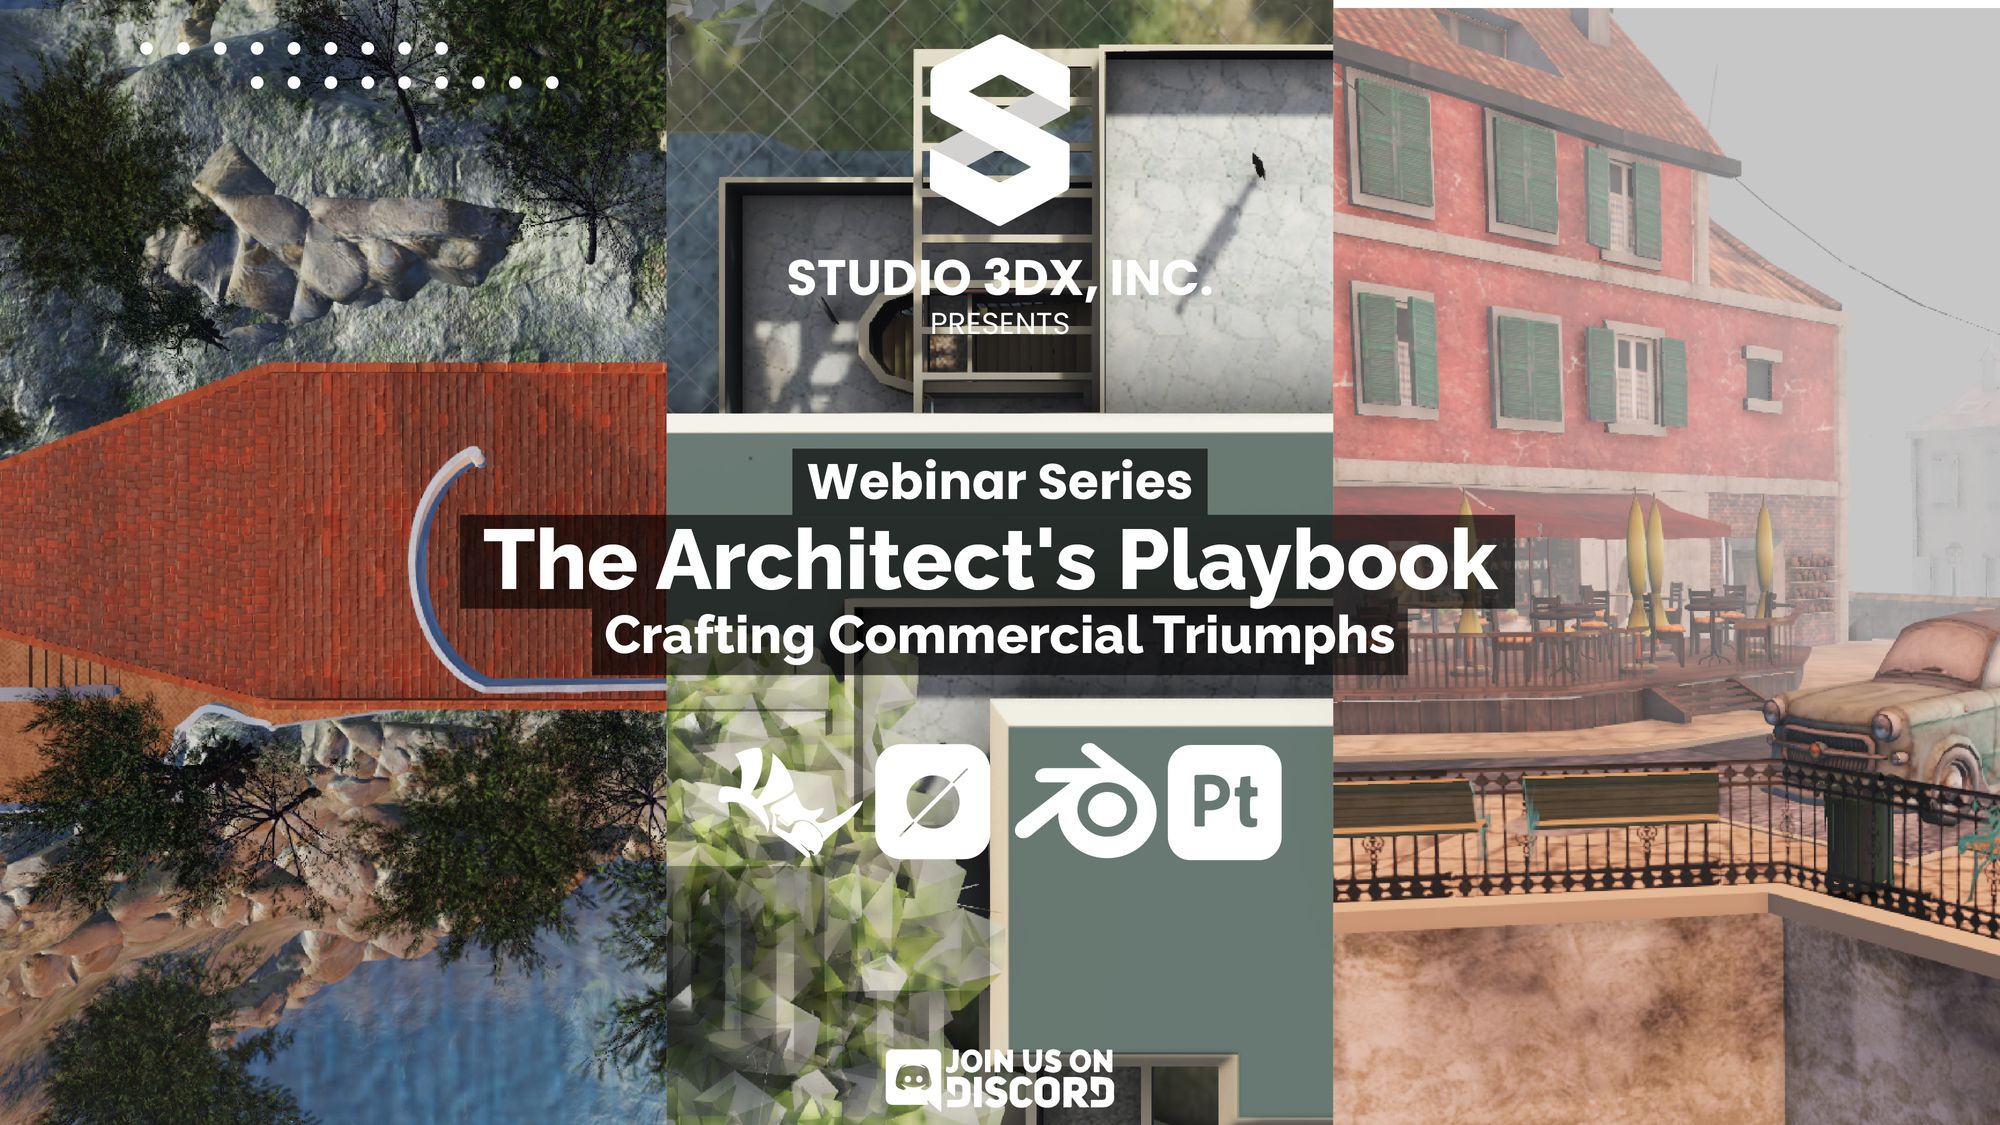 The Architect's Playbook - Webinar Series